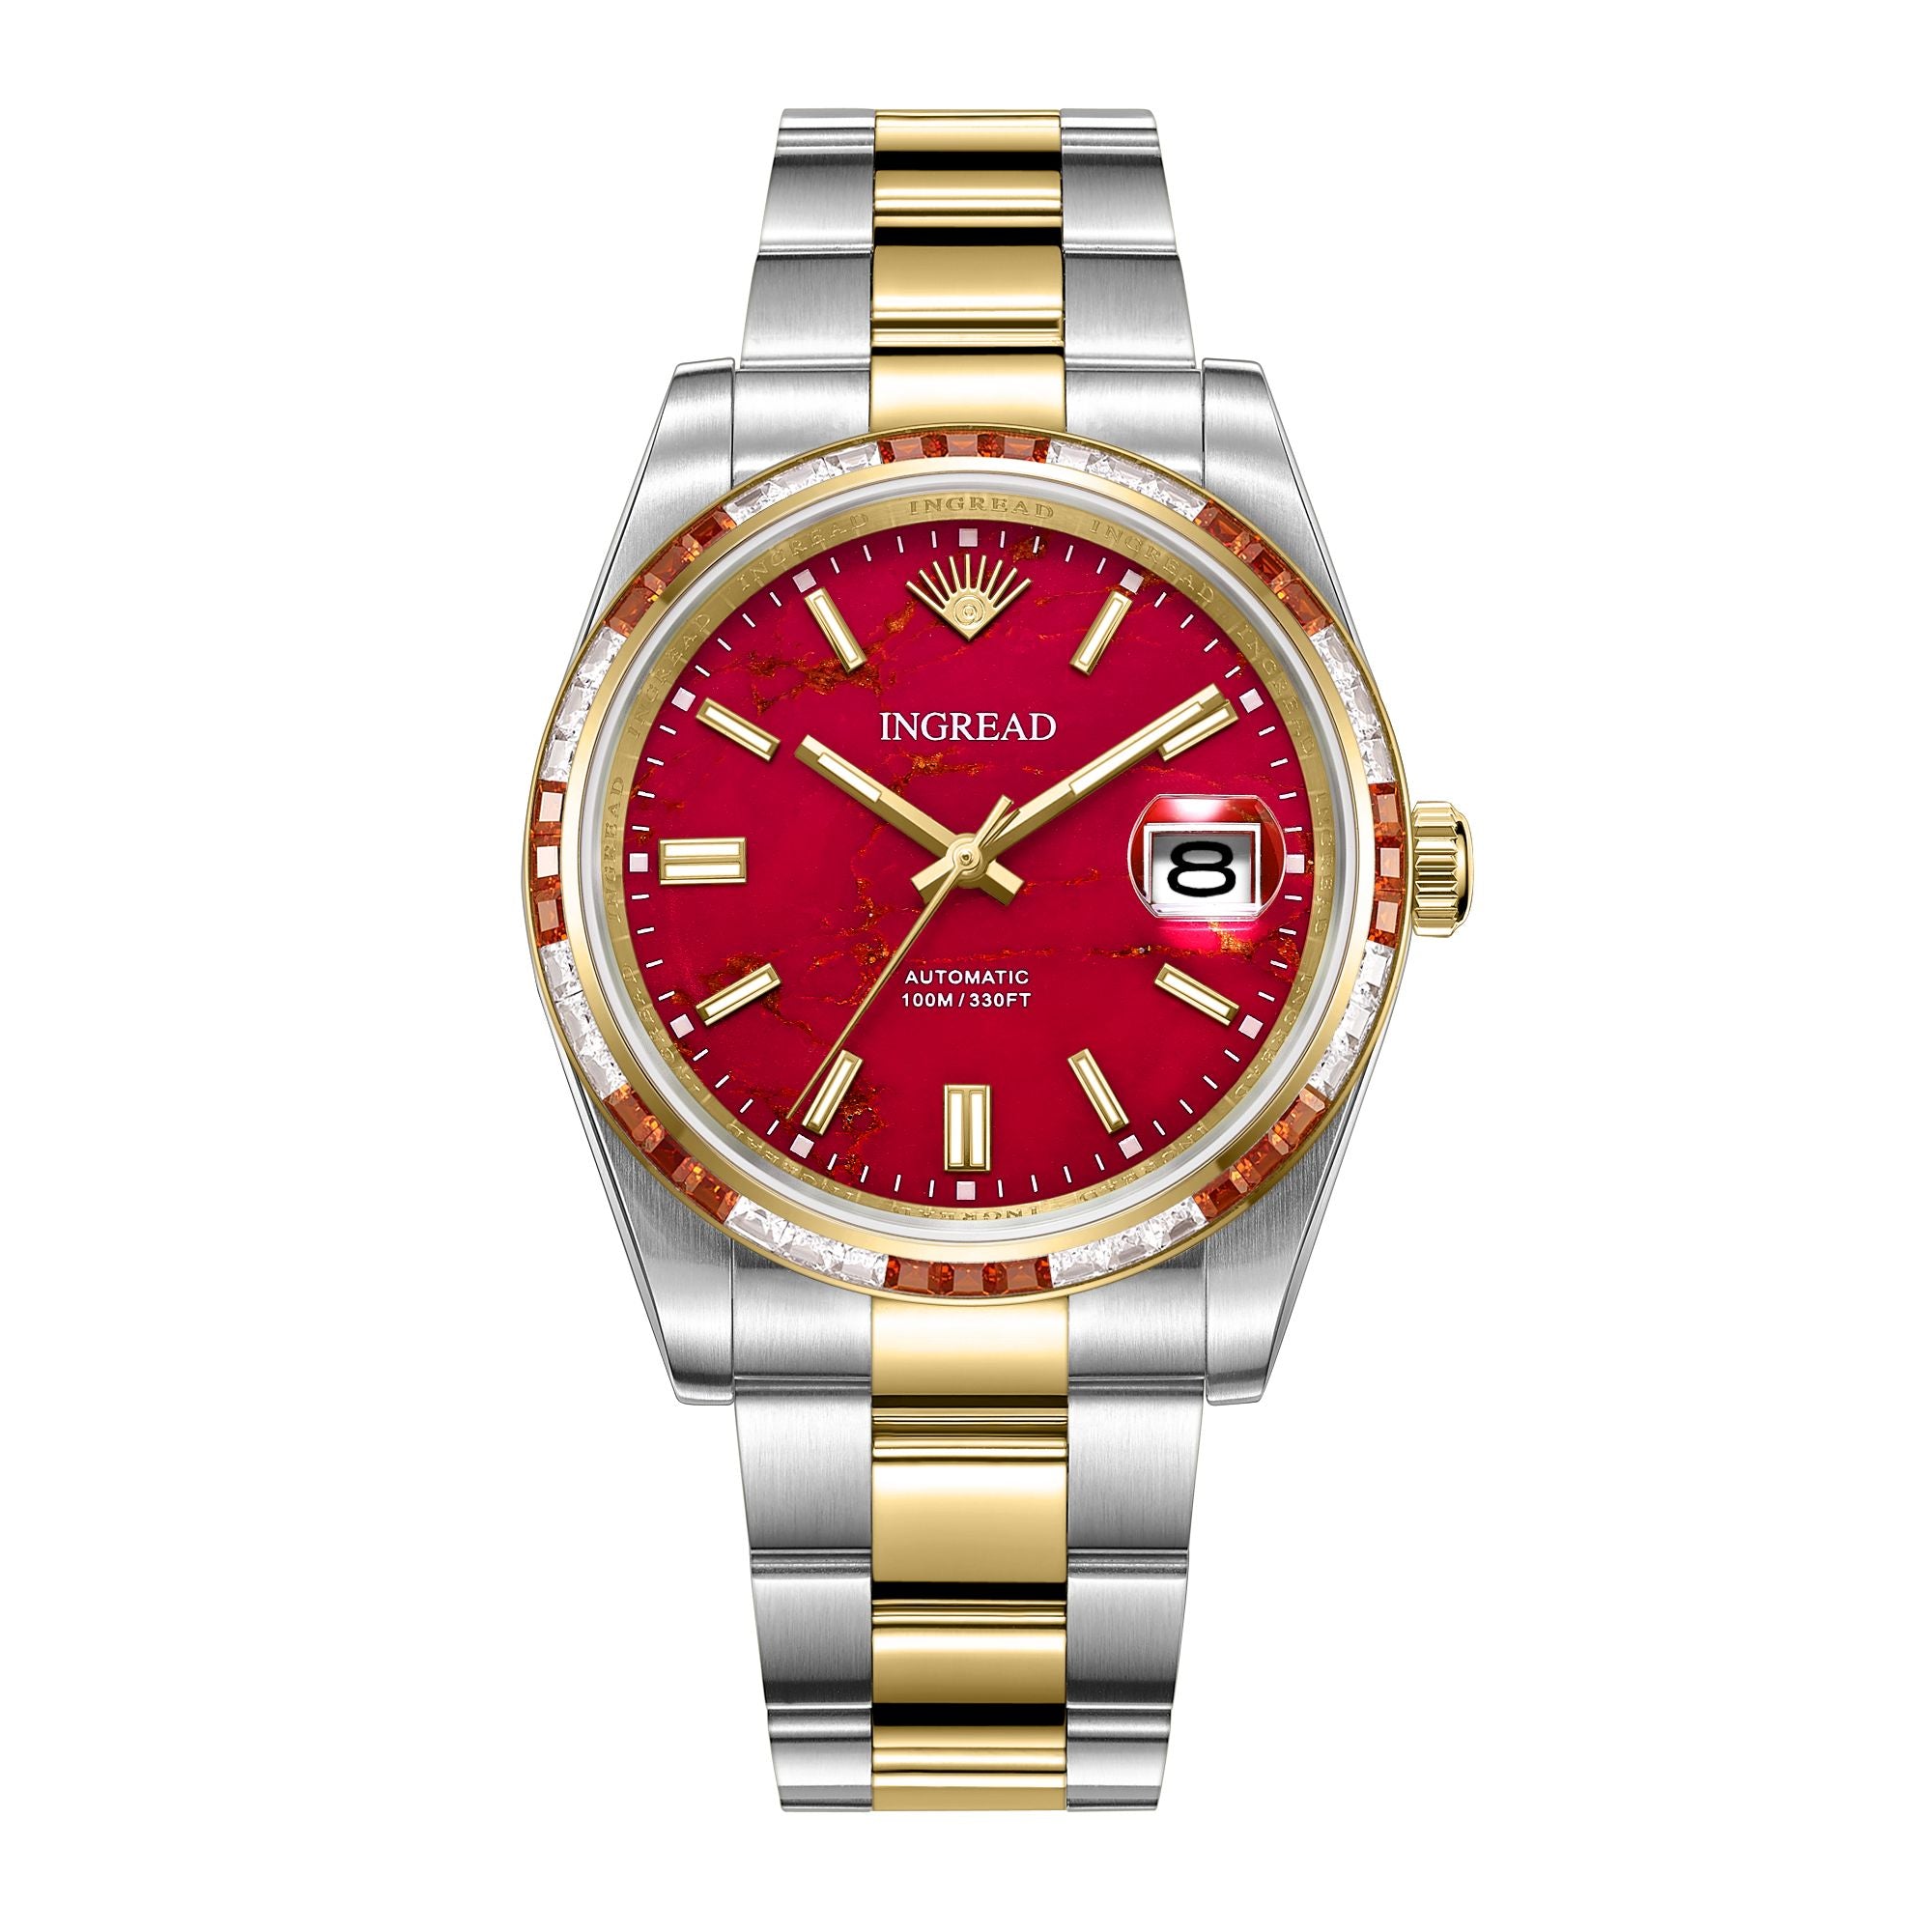 Red-grained Stone with Zircon Gems, Sapphire Crystal, 40mm, Stainless Steel, IN-23006-AA